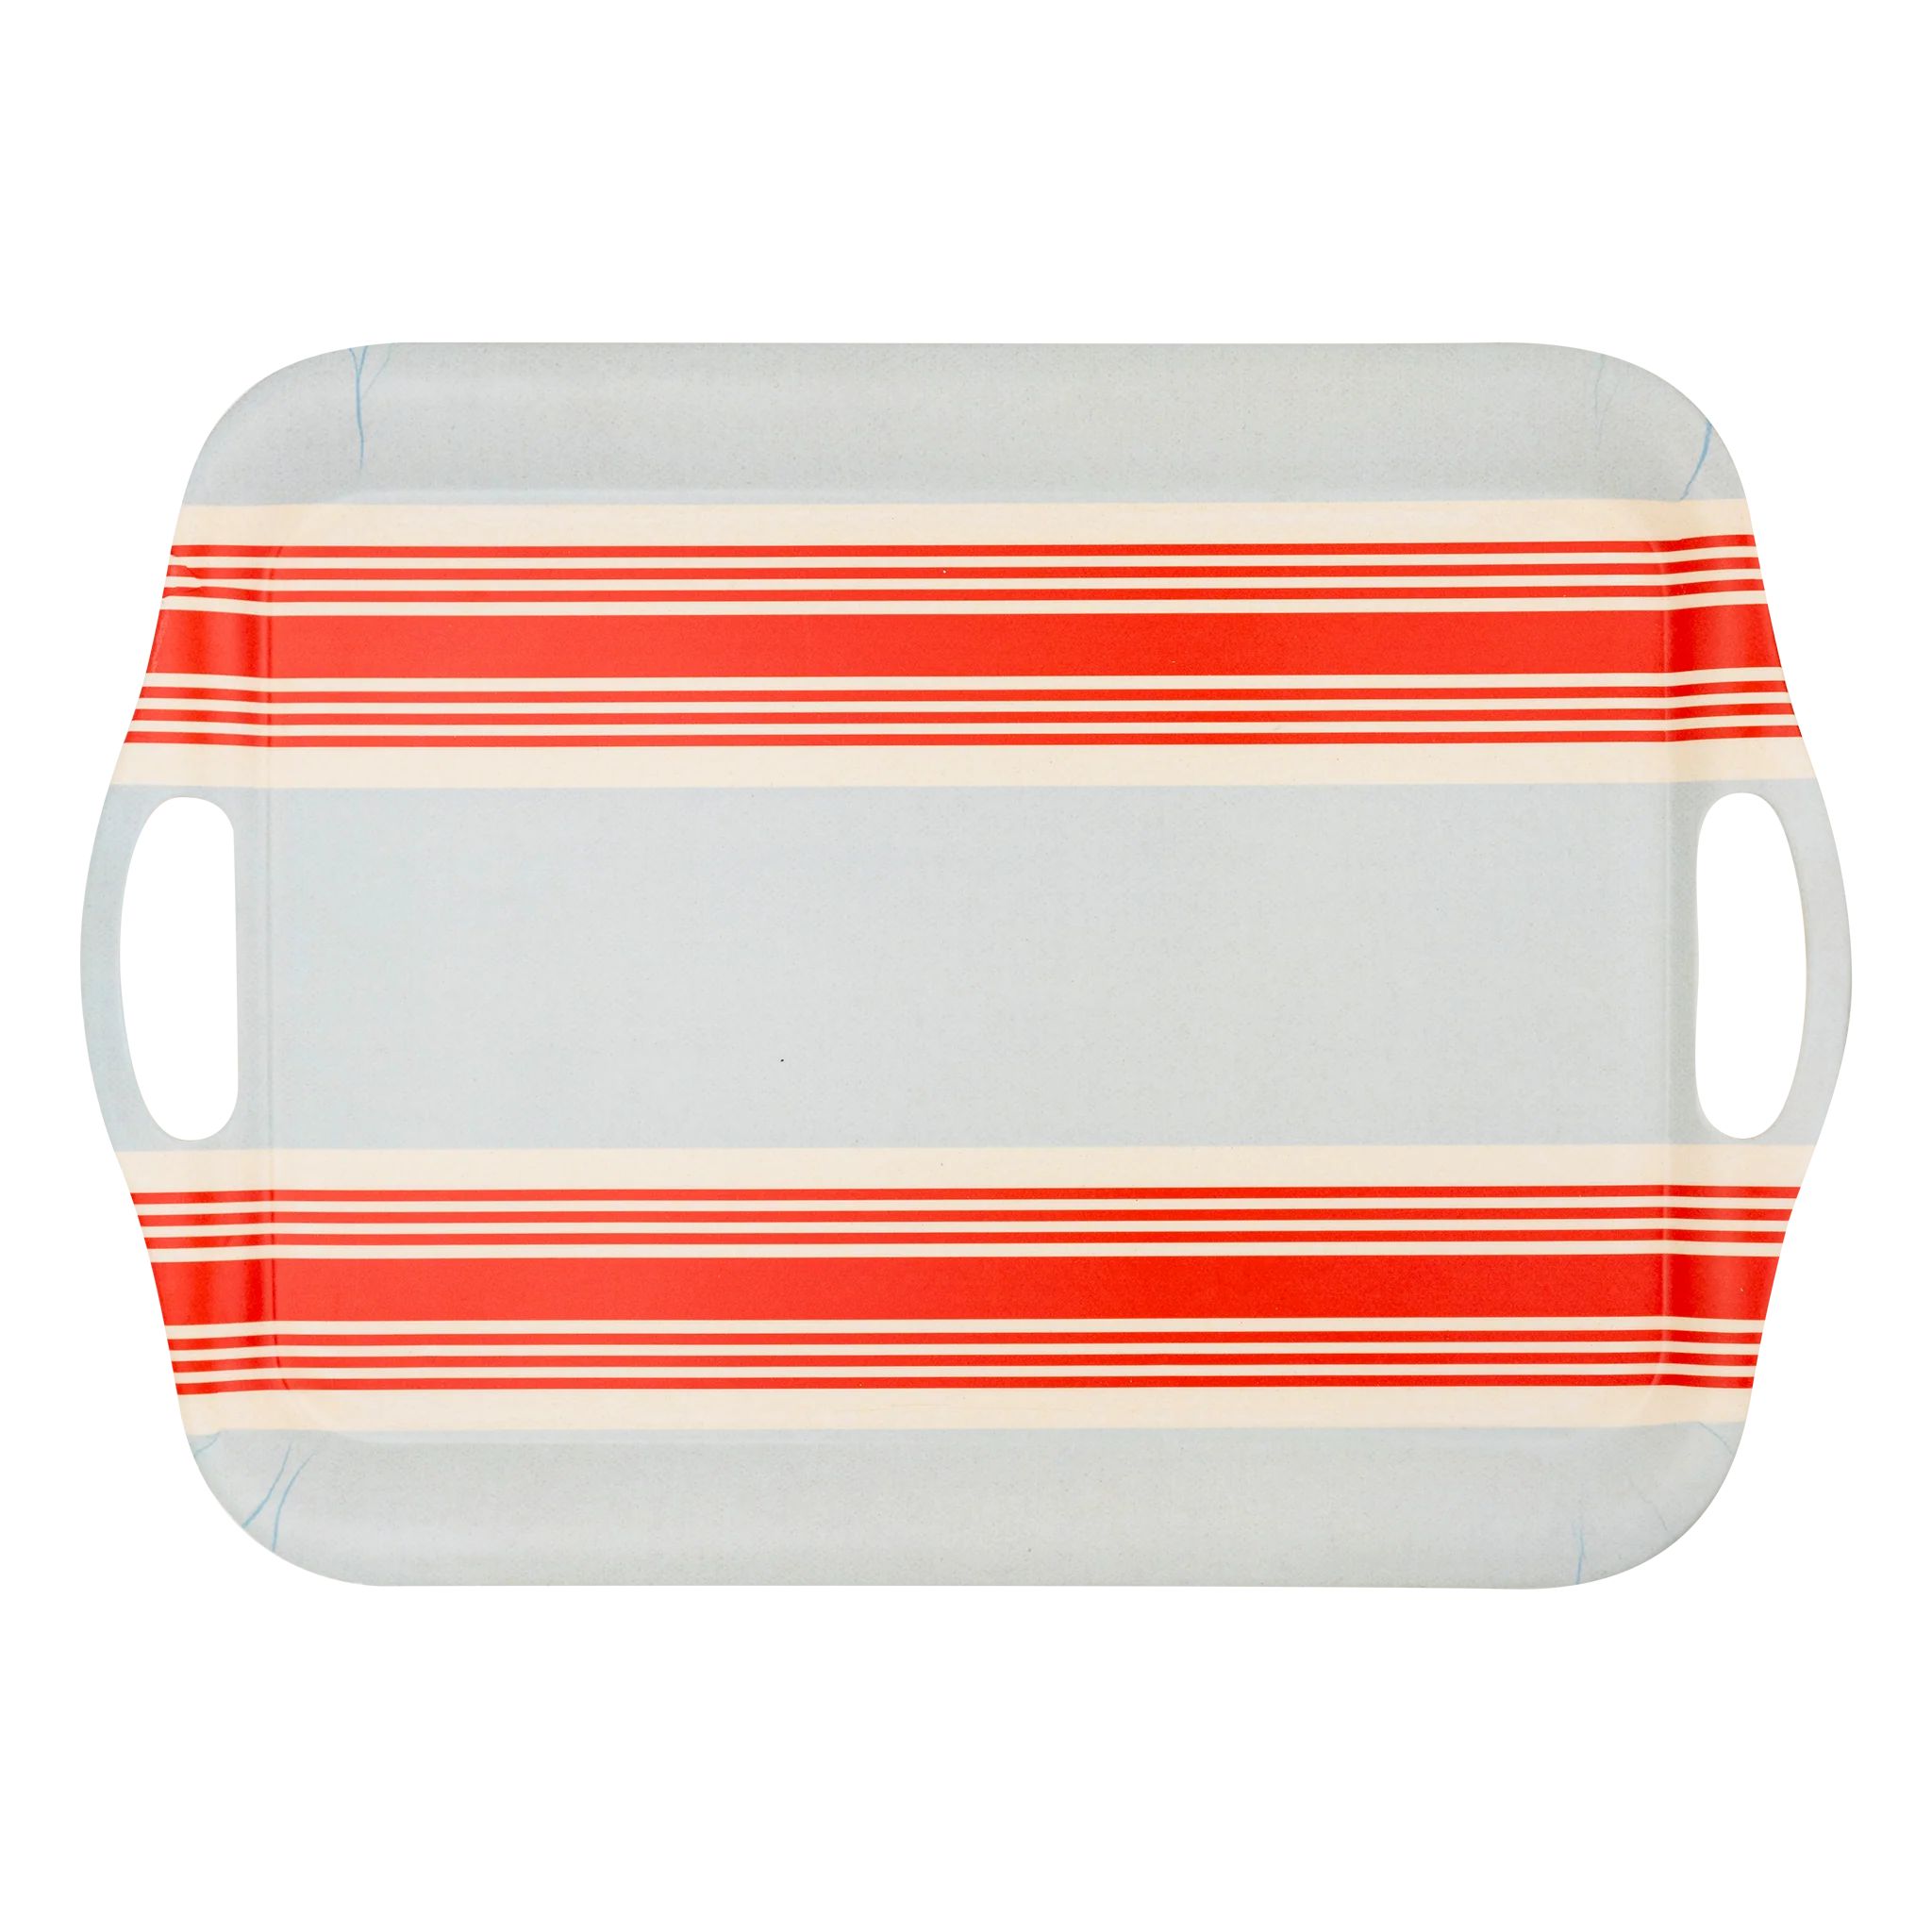 Hamptons Striped Chambray and Red Reusable Bamboo Tray | My Mind's Eye